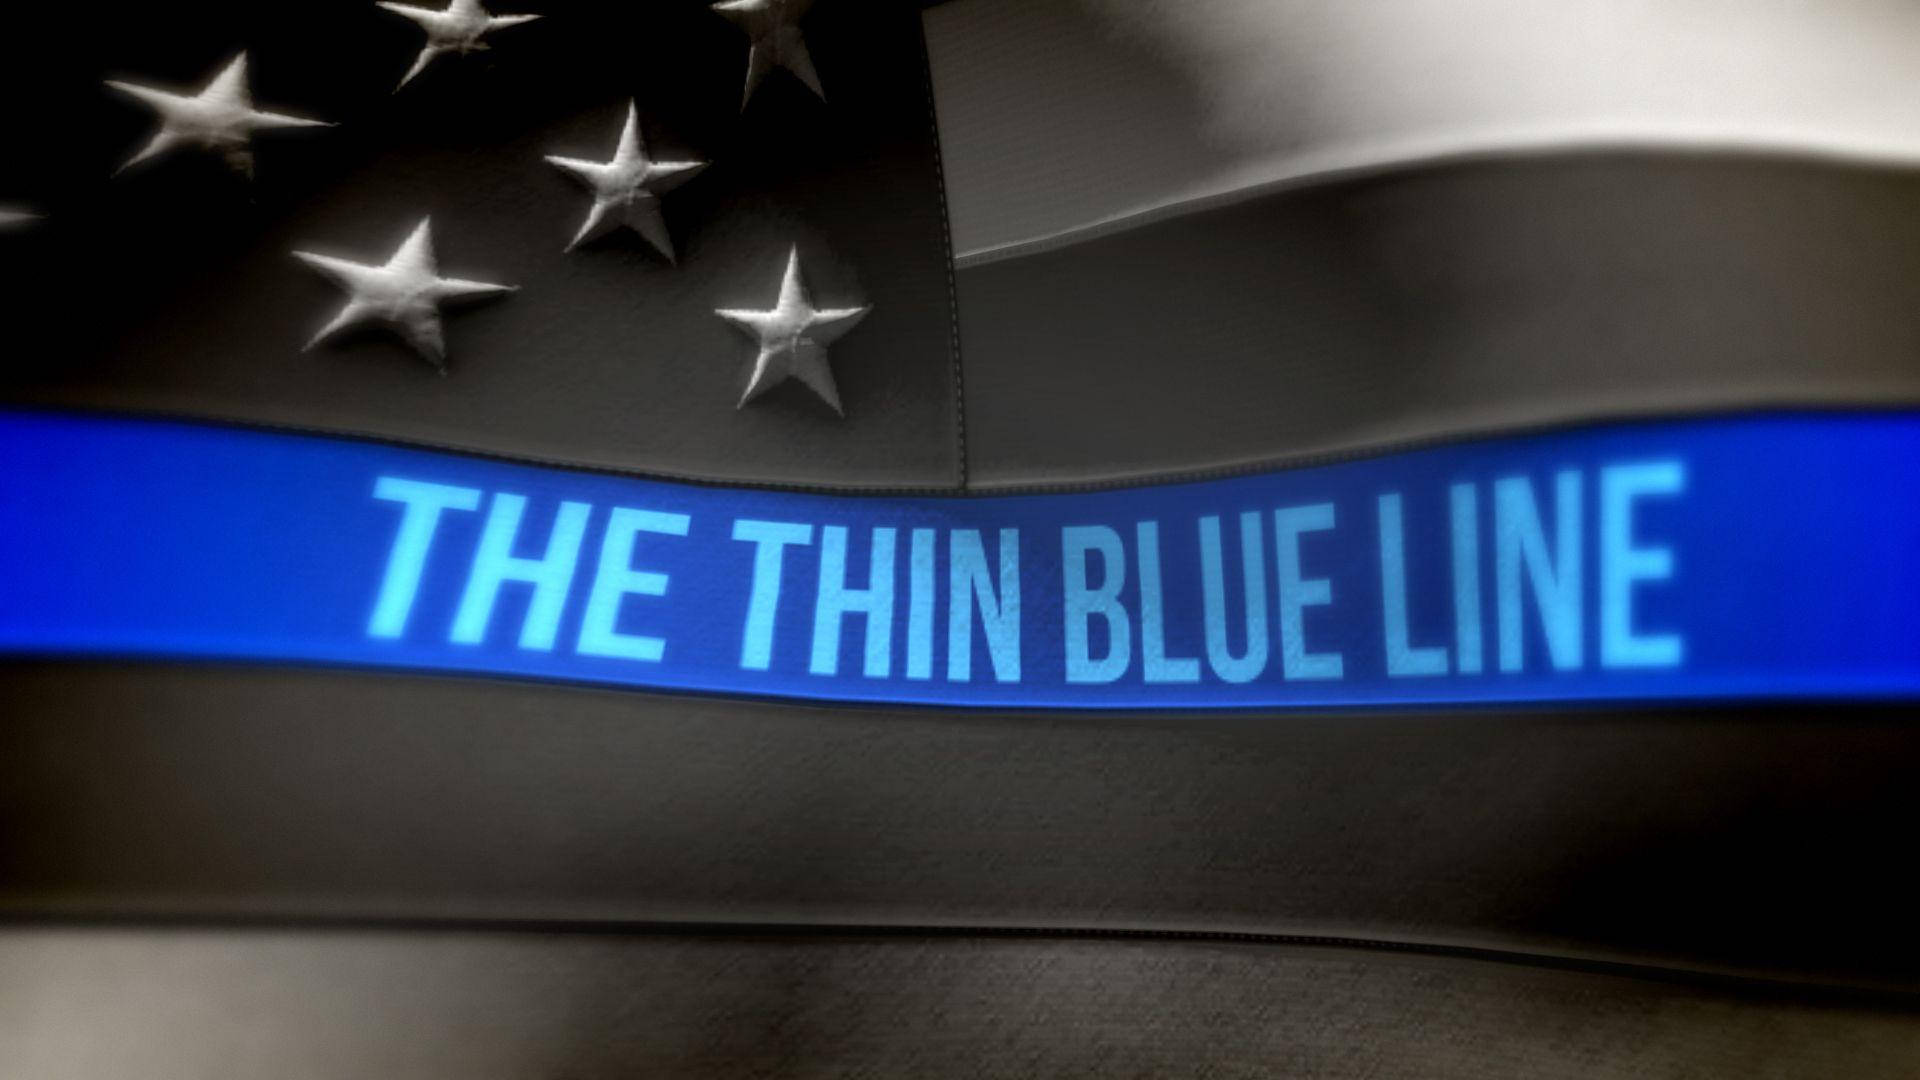 "Honoring the brave men and women who serve and protect the Thin Blue Line" Wallpaper